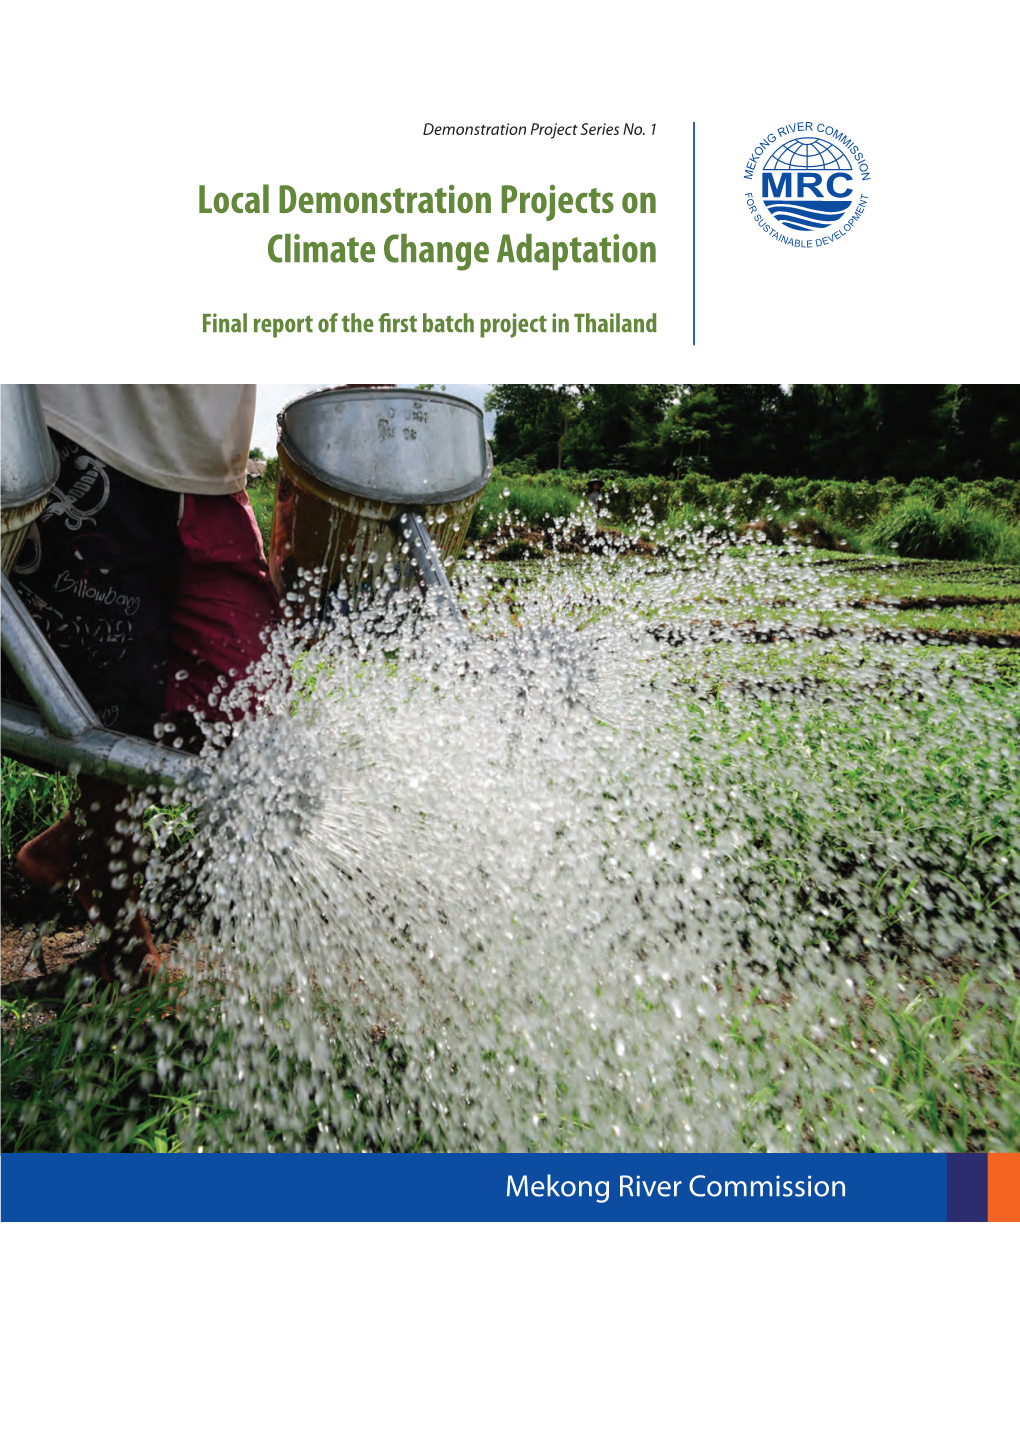 Local Demonstration Projects on Climate Change Adaptation